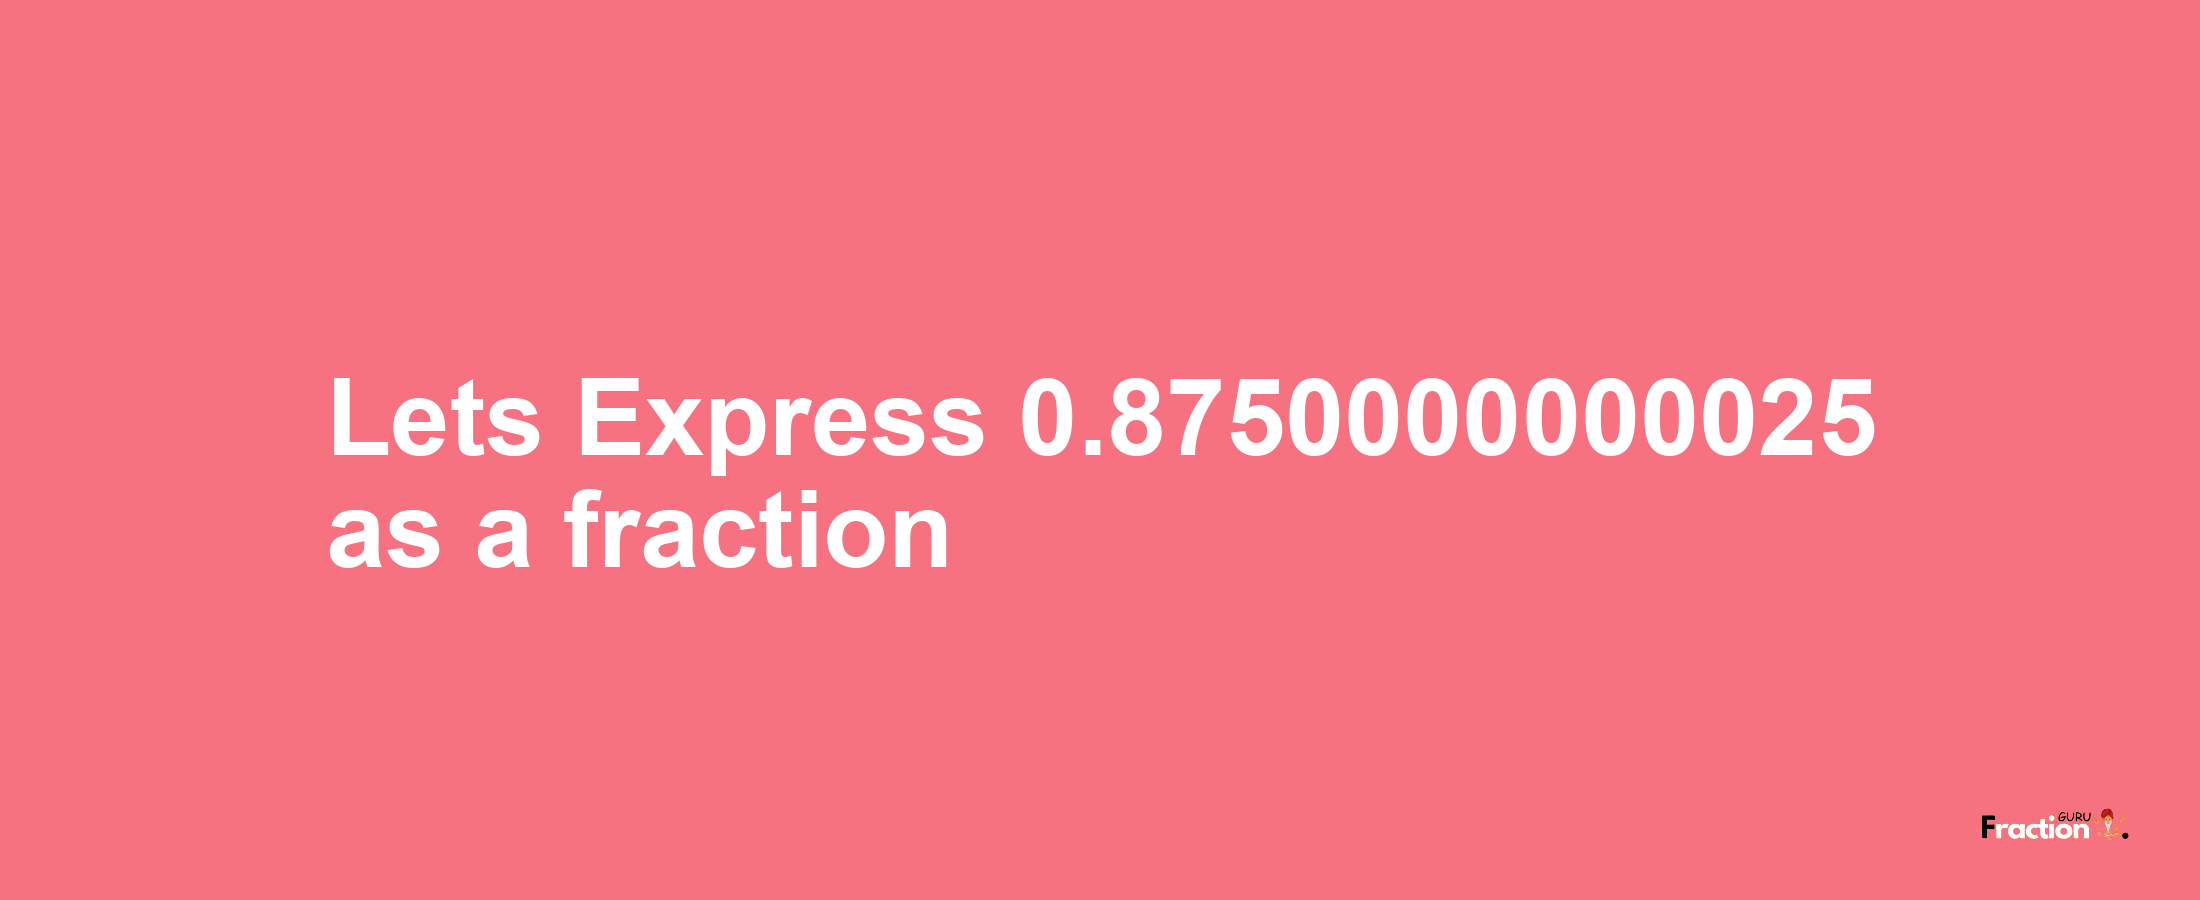 Lets Express 0.8750000000025 as afraction